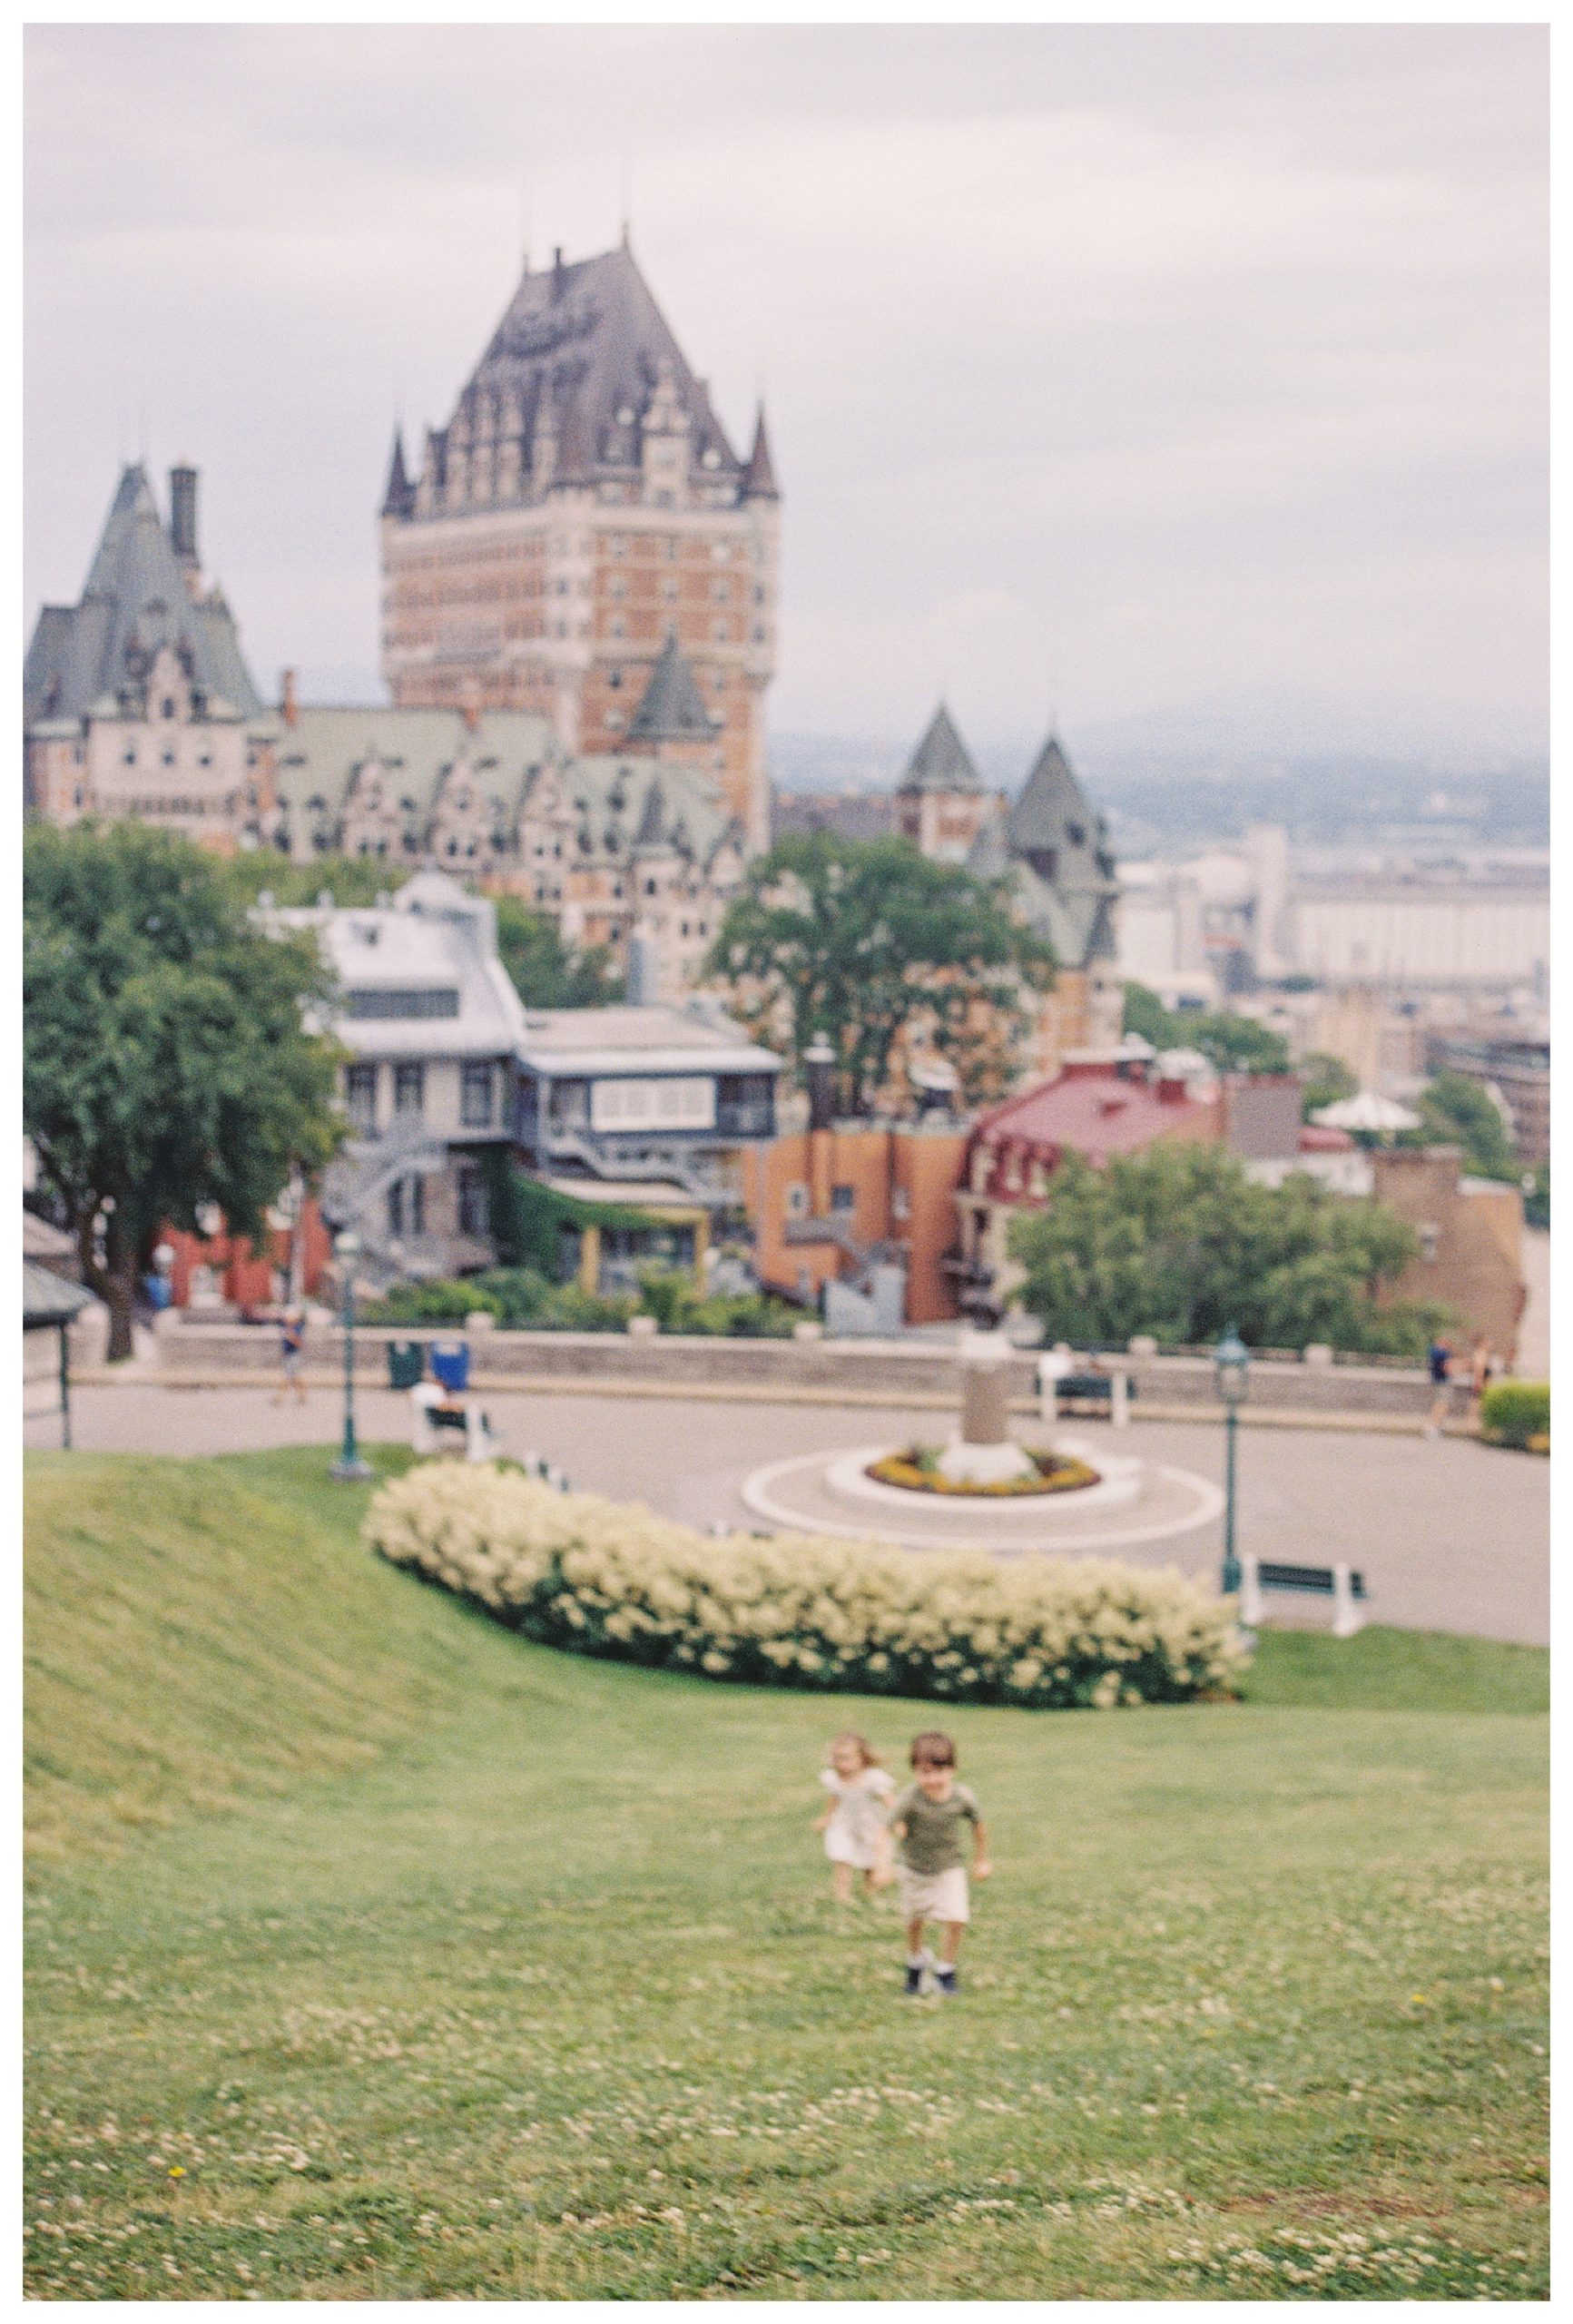 View of children running up hill in front of Fairmont Chateau in Old Quebec City.